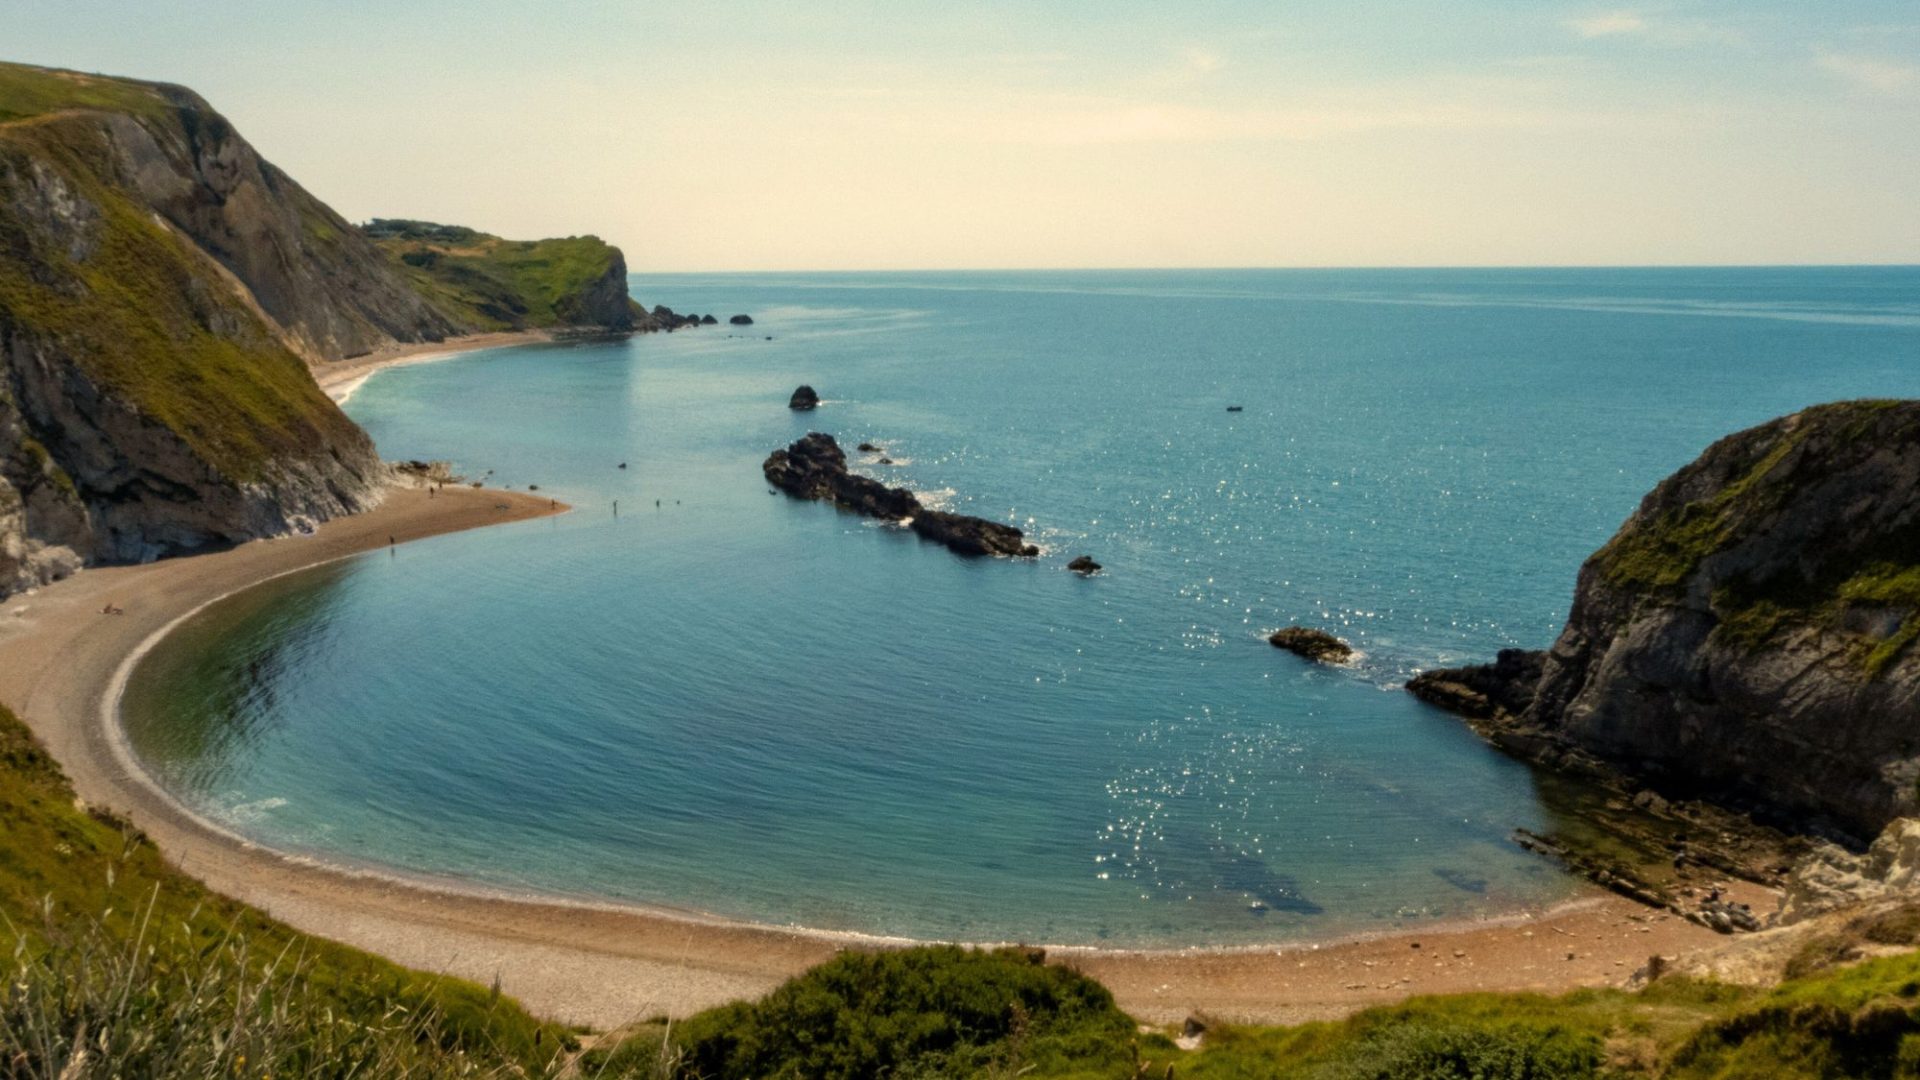 Cove in Dorset | A great place to visit for a last minute holiday in Dorset